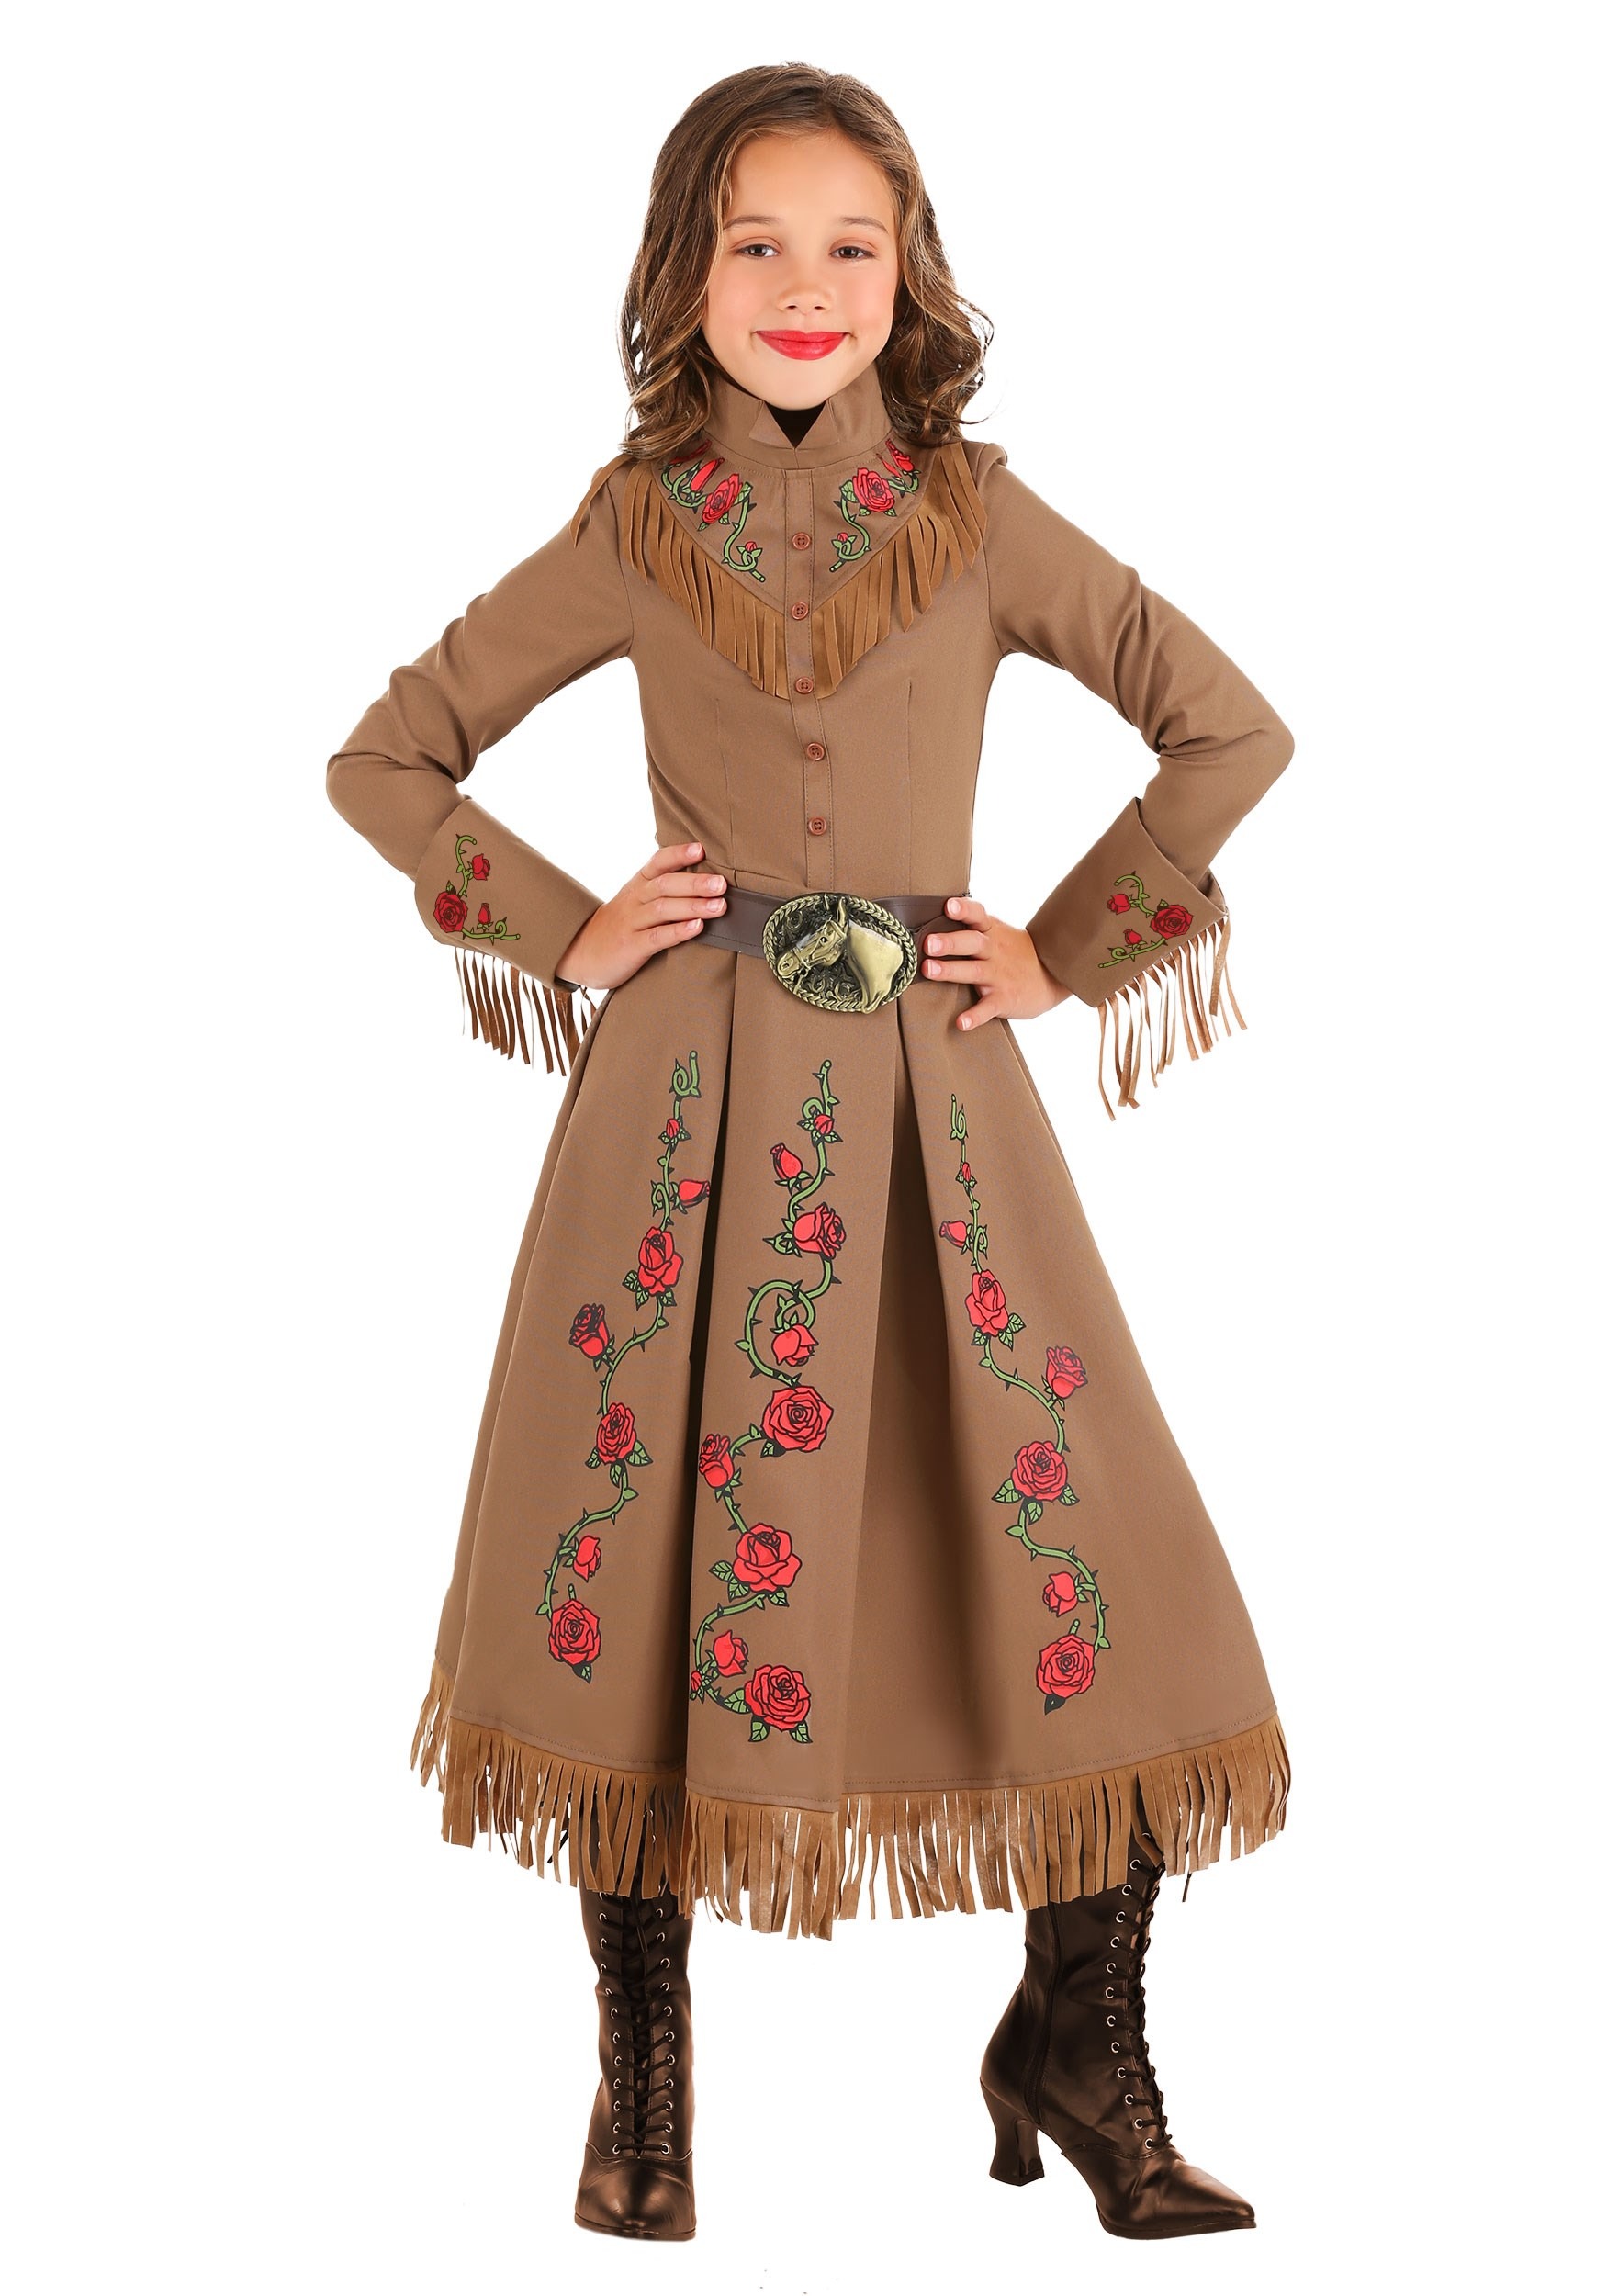 Annie Oakley Cowgirl Costume For Girls , Historical Figure Costumes